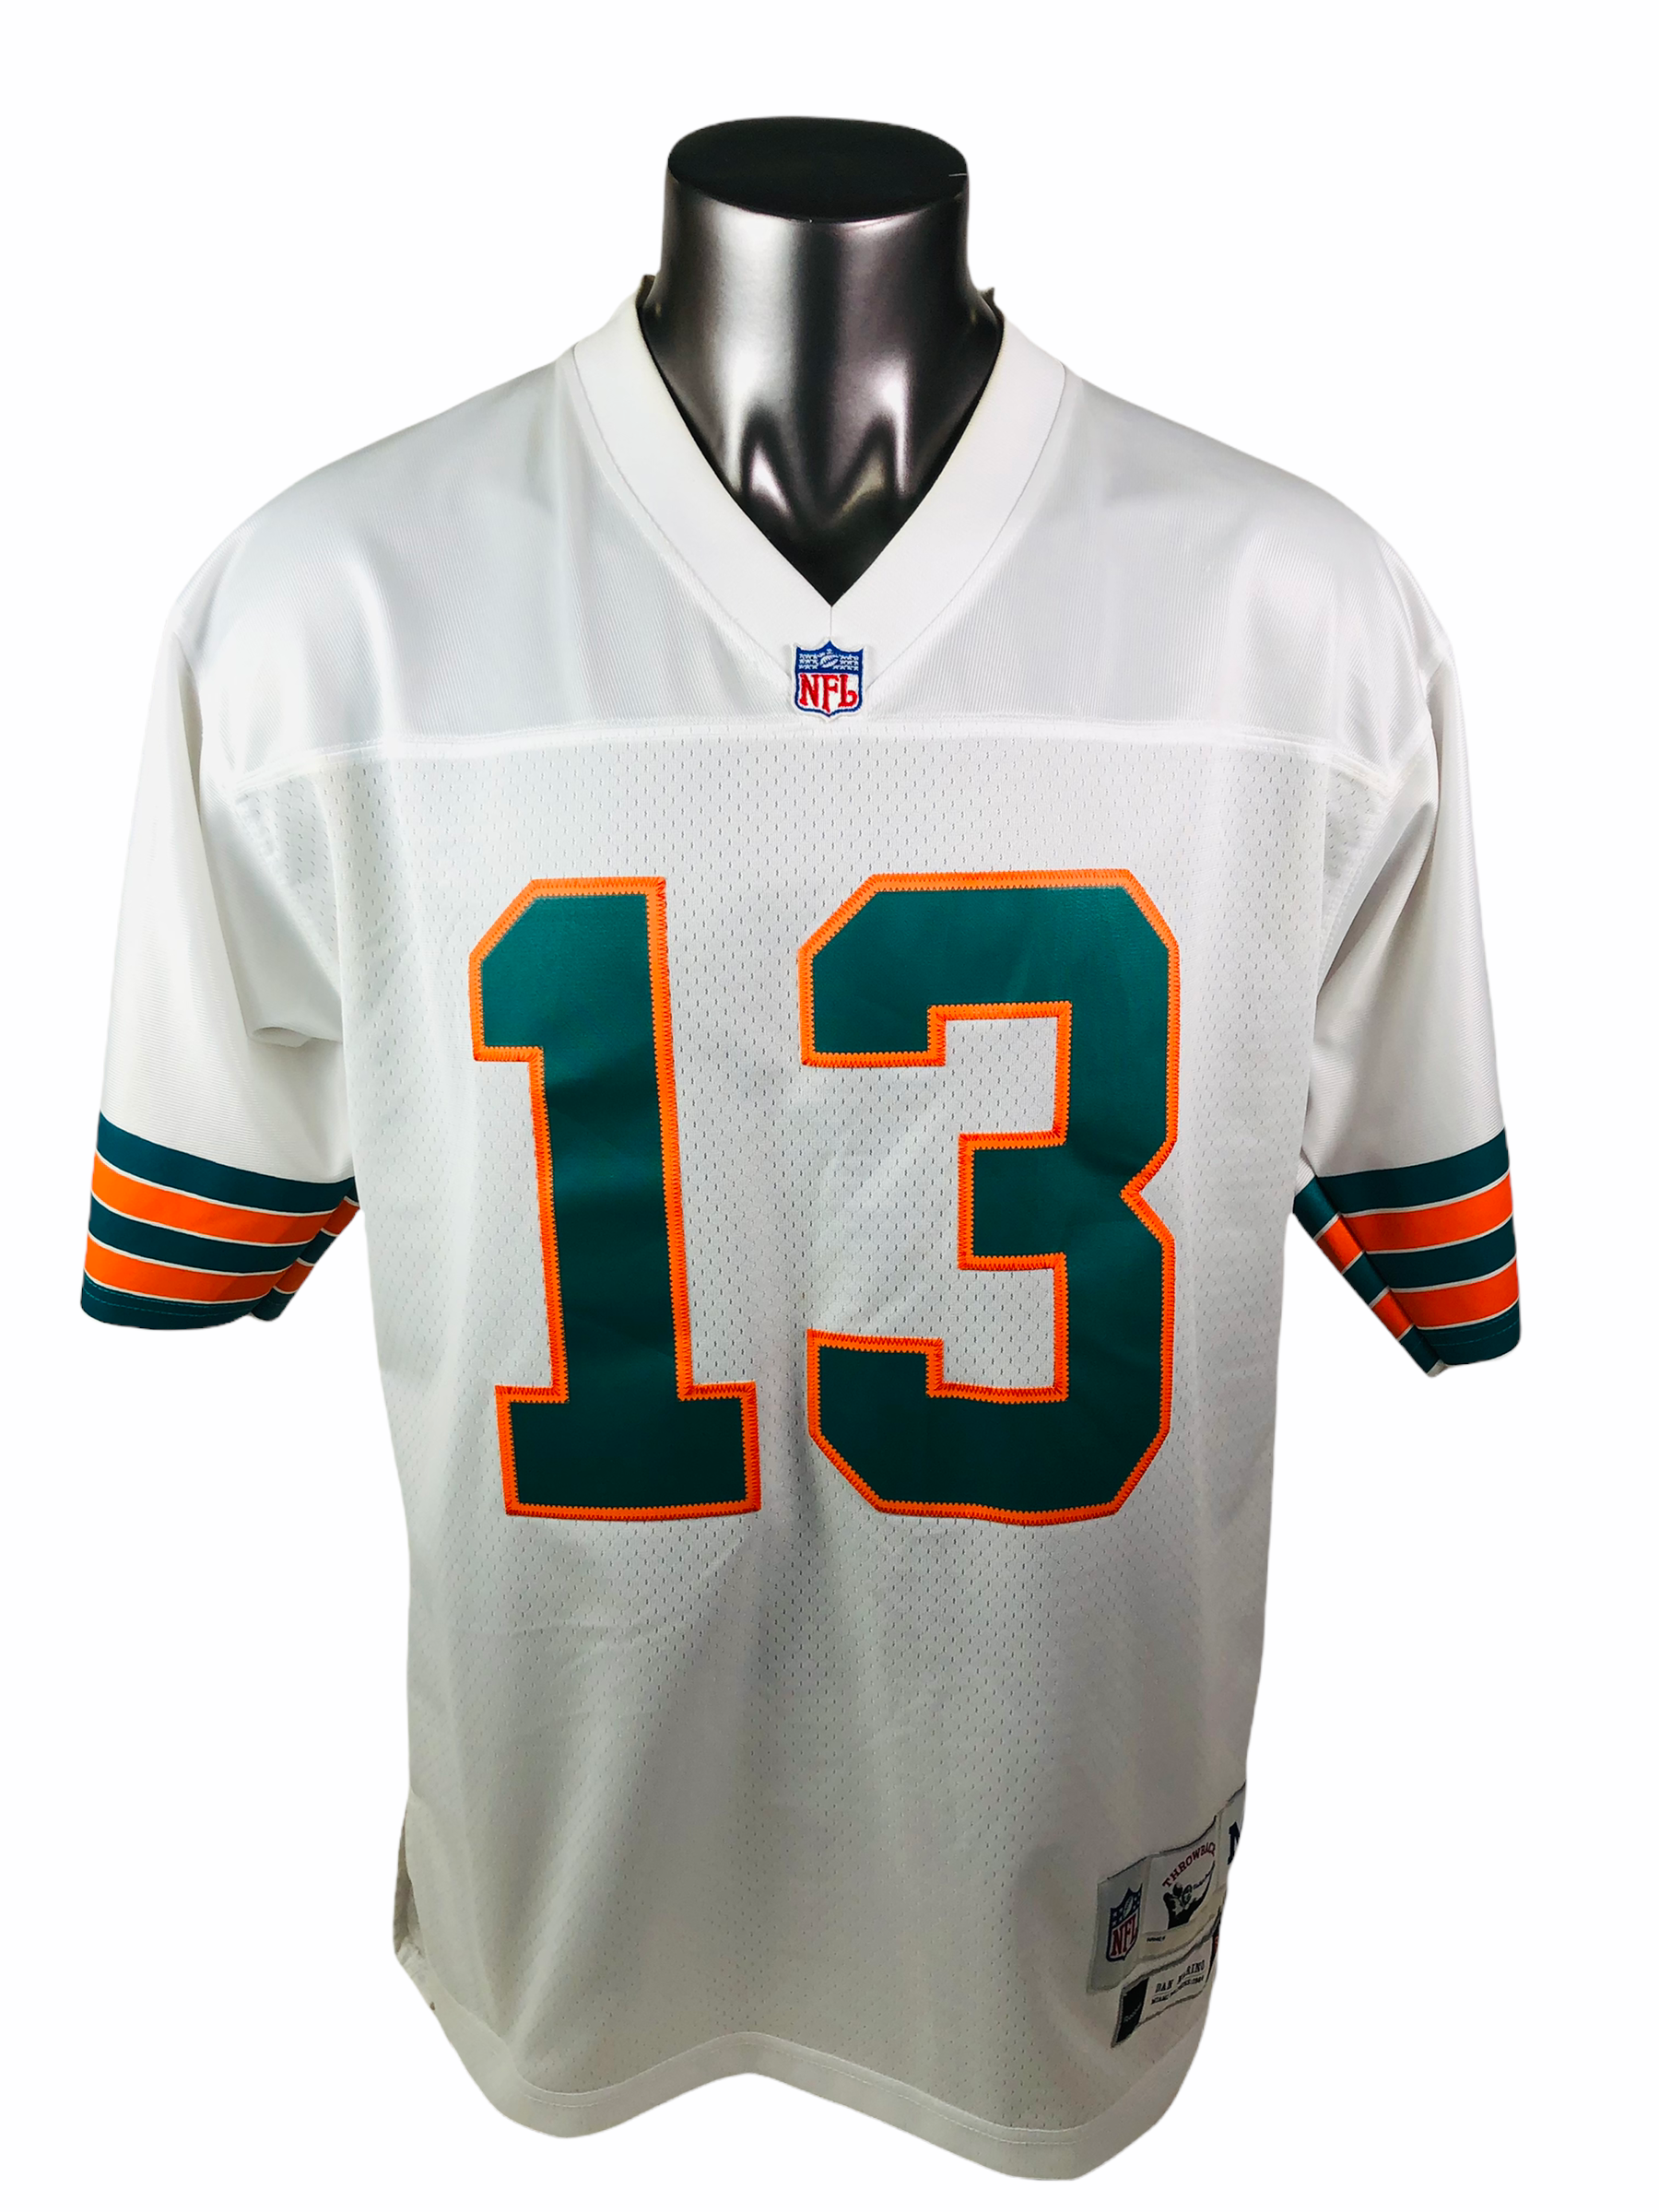 miami dolphins throwback jersey